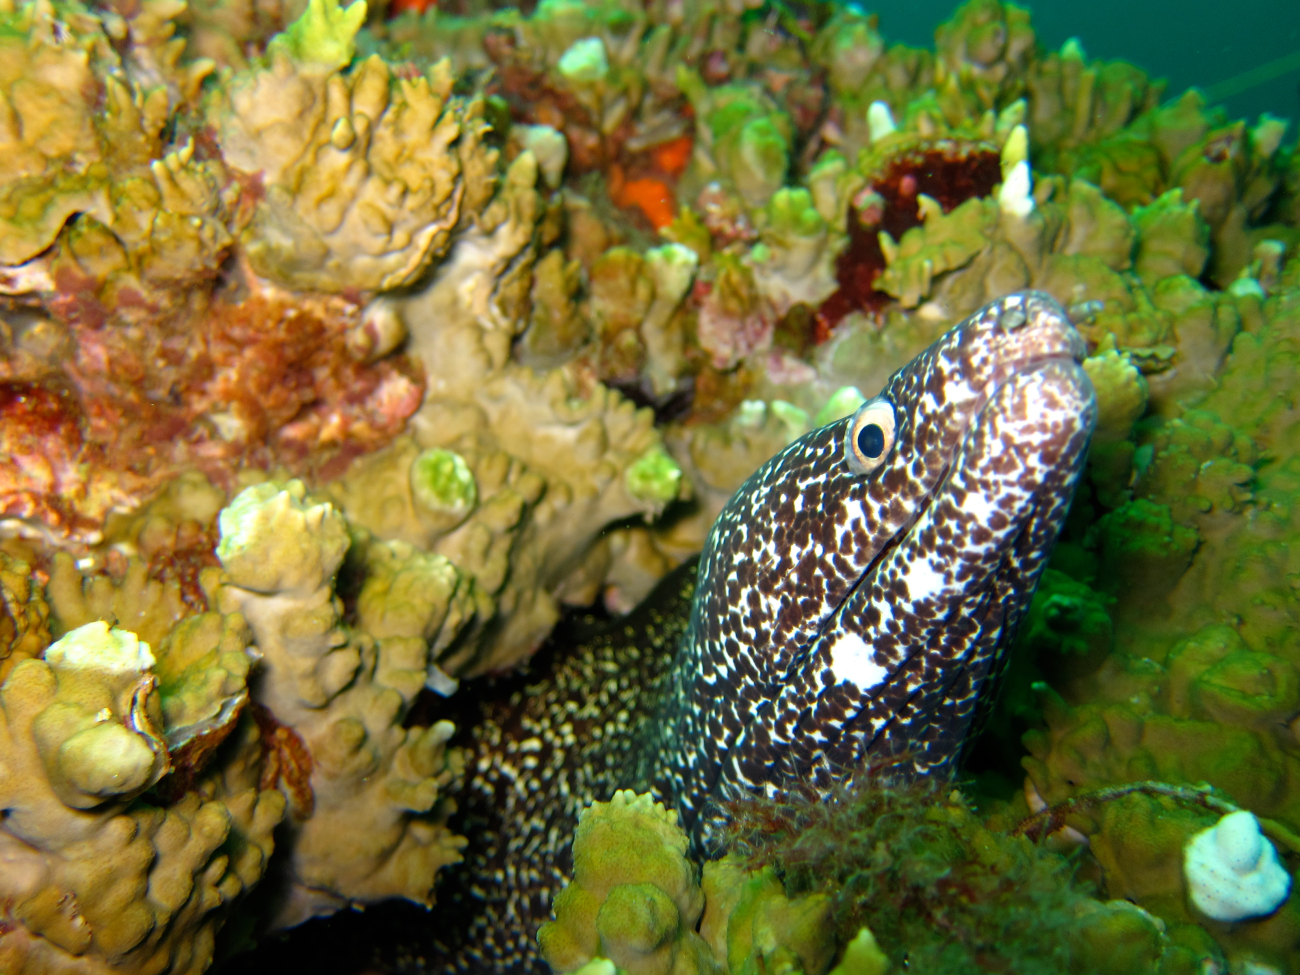 A spotted moray eel peers out from its hole in the coral